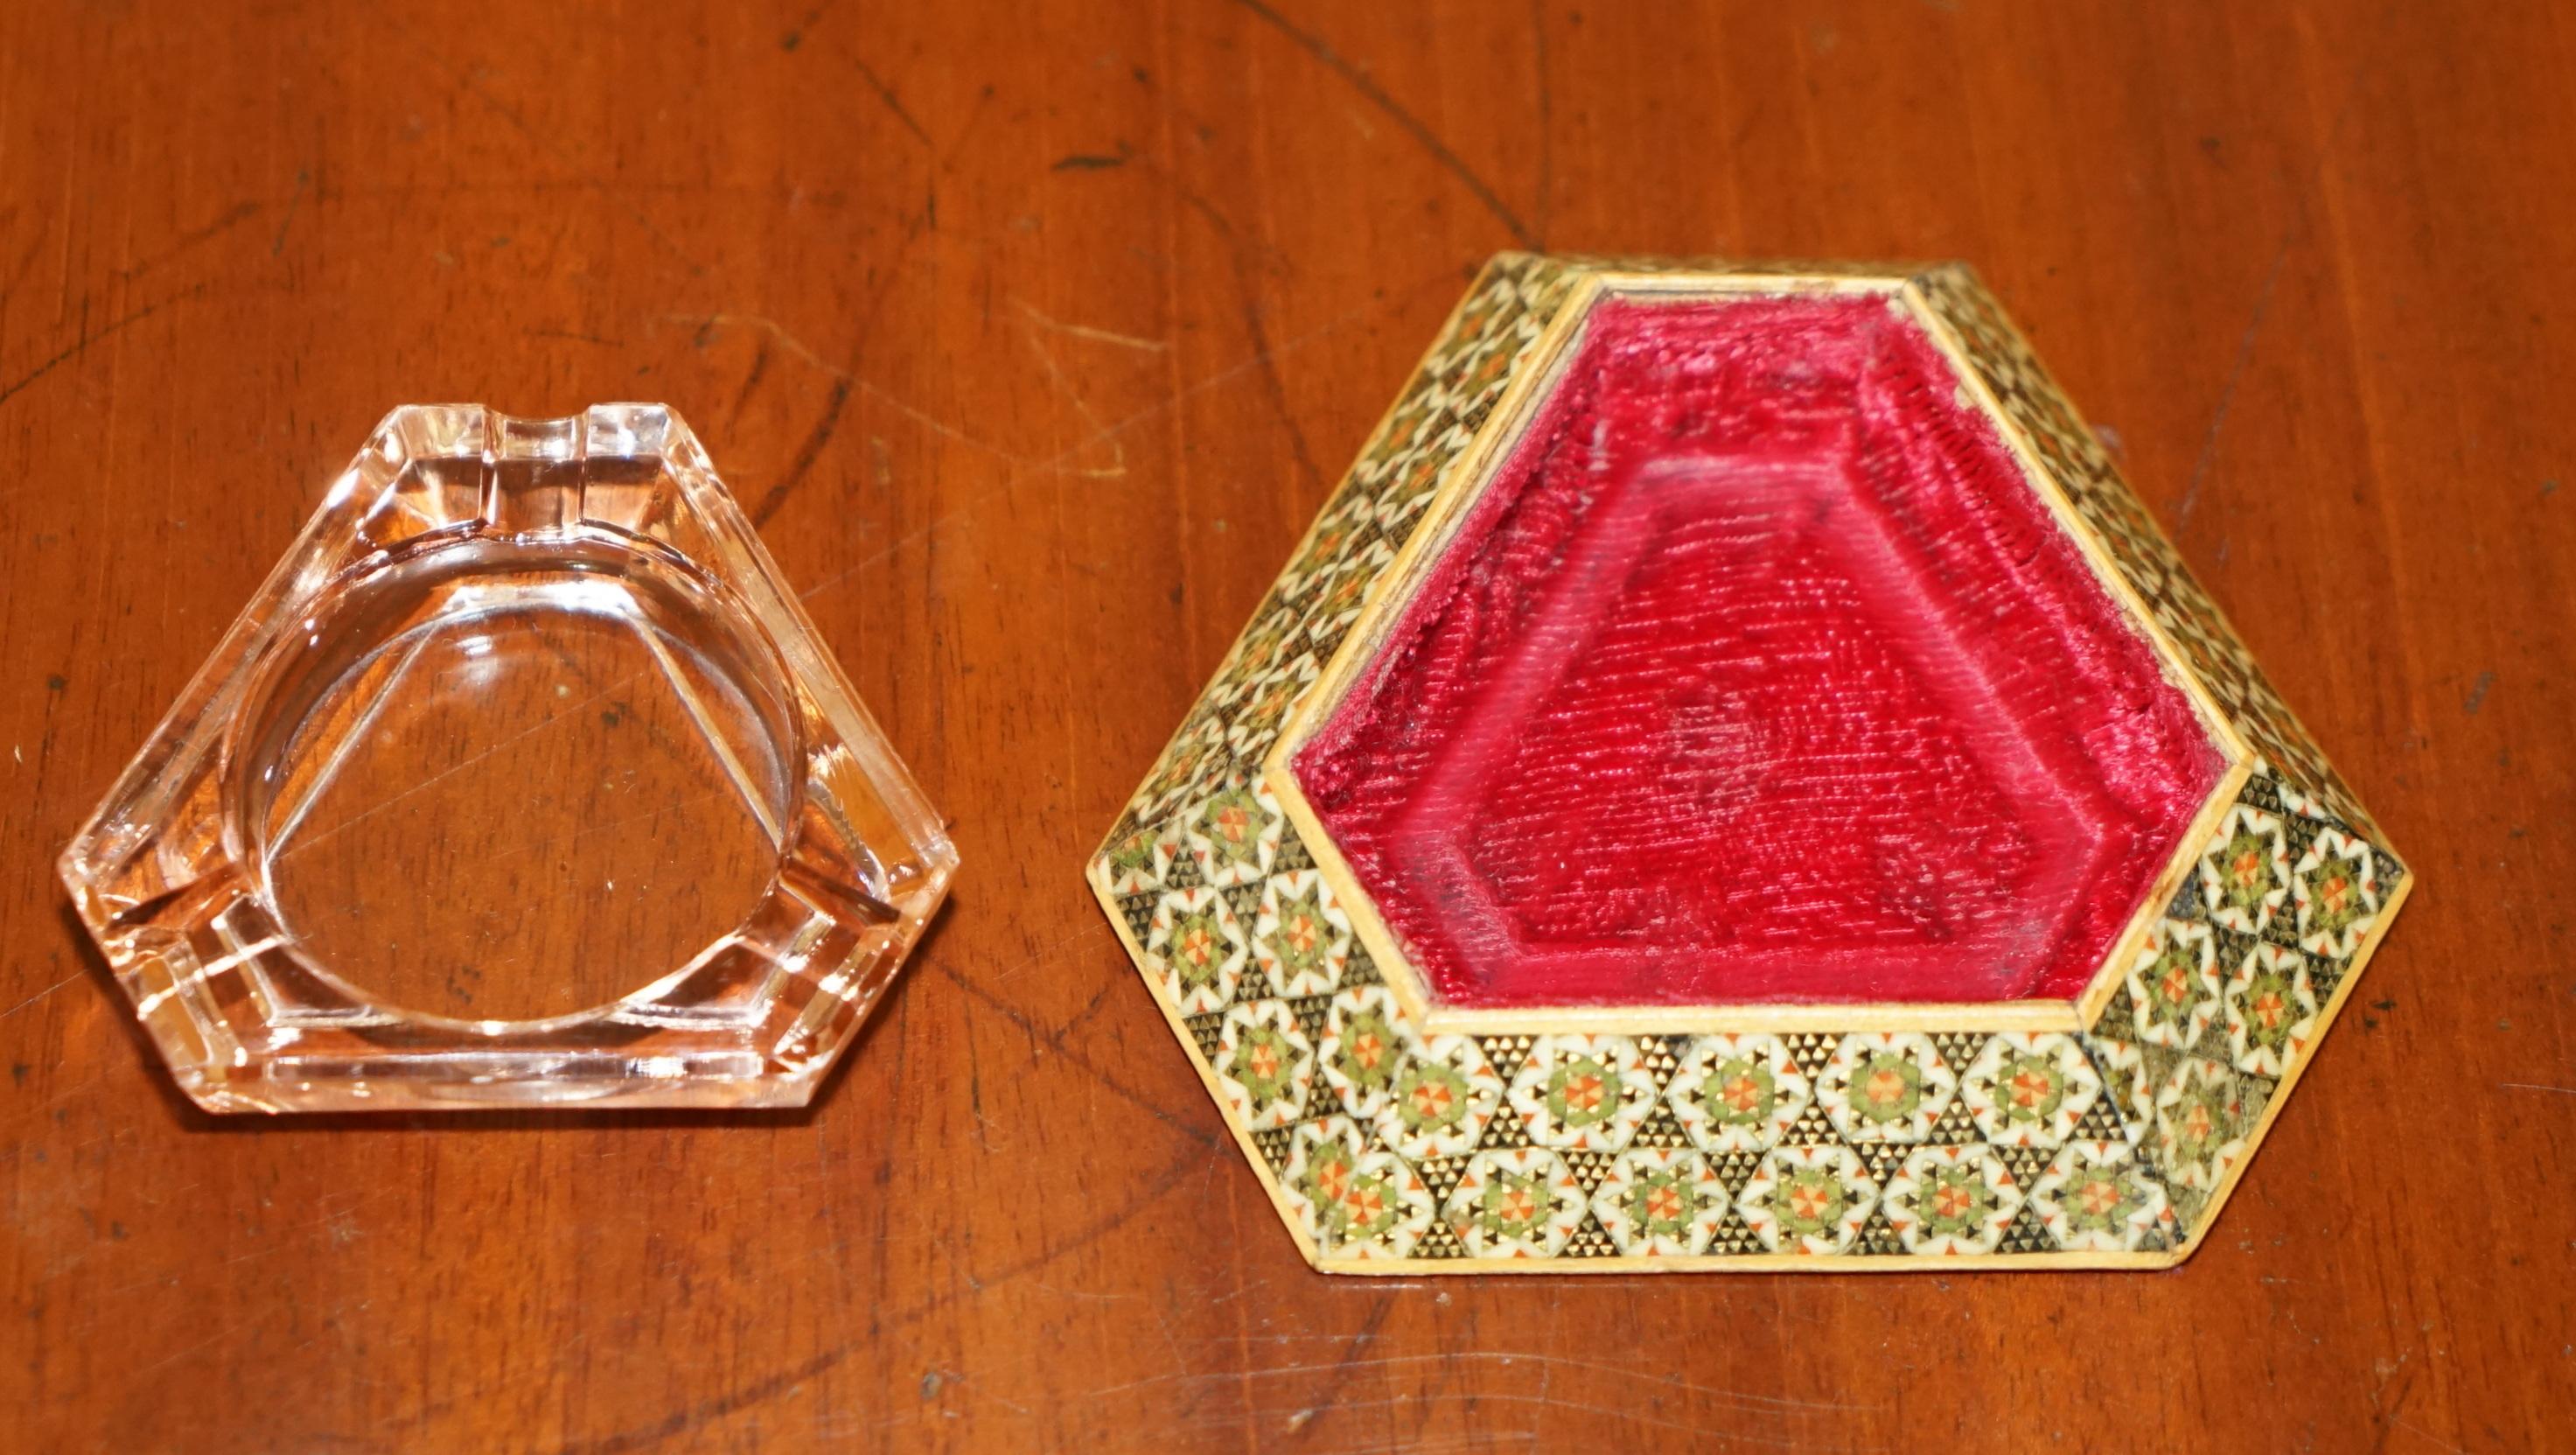 20th Century ANTIQUE PERSIAN ASHTRAY WiTH CRANBERRY GLASS TRIANGLE INTERNAL TRAY For Sale